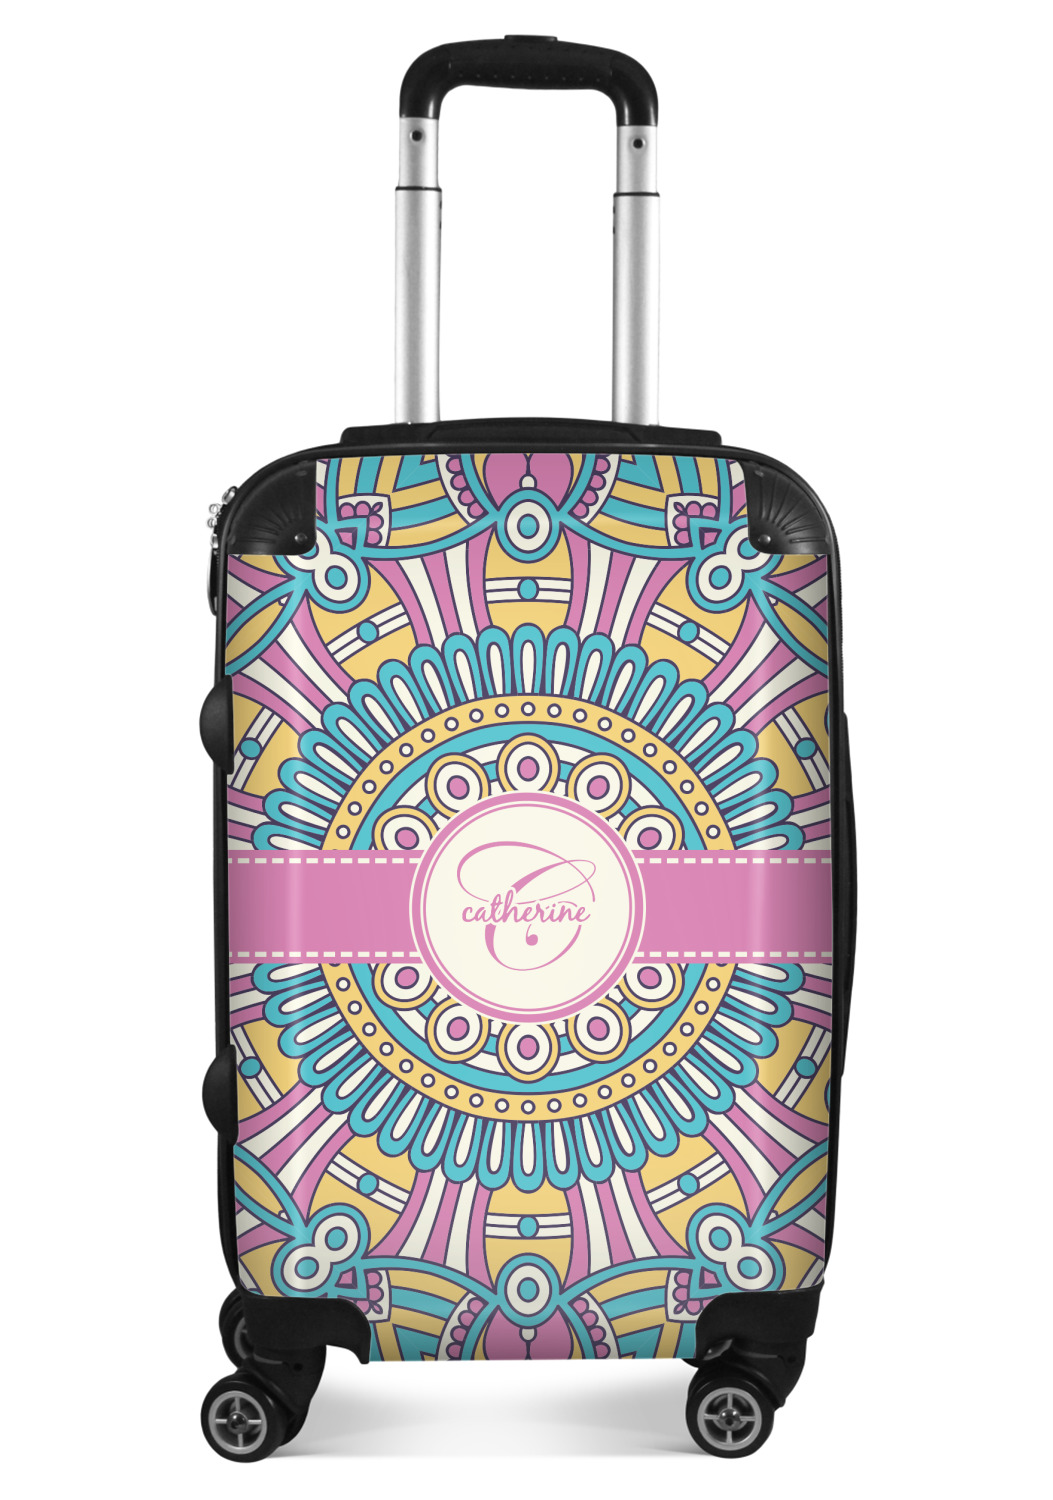 https://www.youcustomizeit.com/common/MAKE/1939443/Bohemian-Art-Carry-On-Travel-Bag-With-Handle.jpg?lm=1669658248